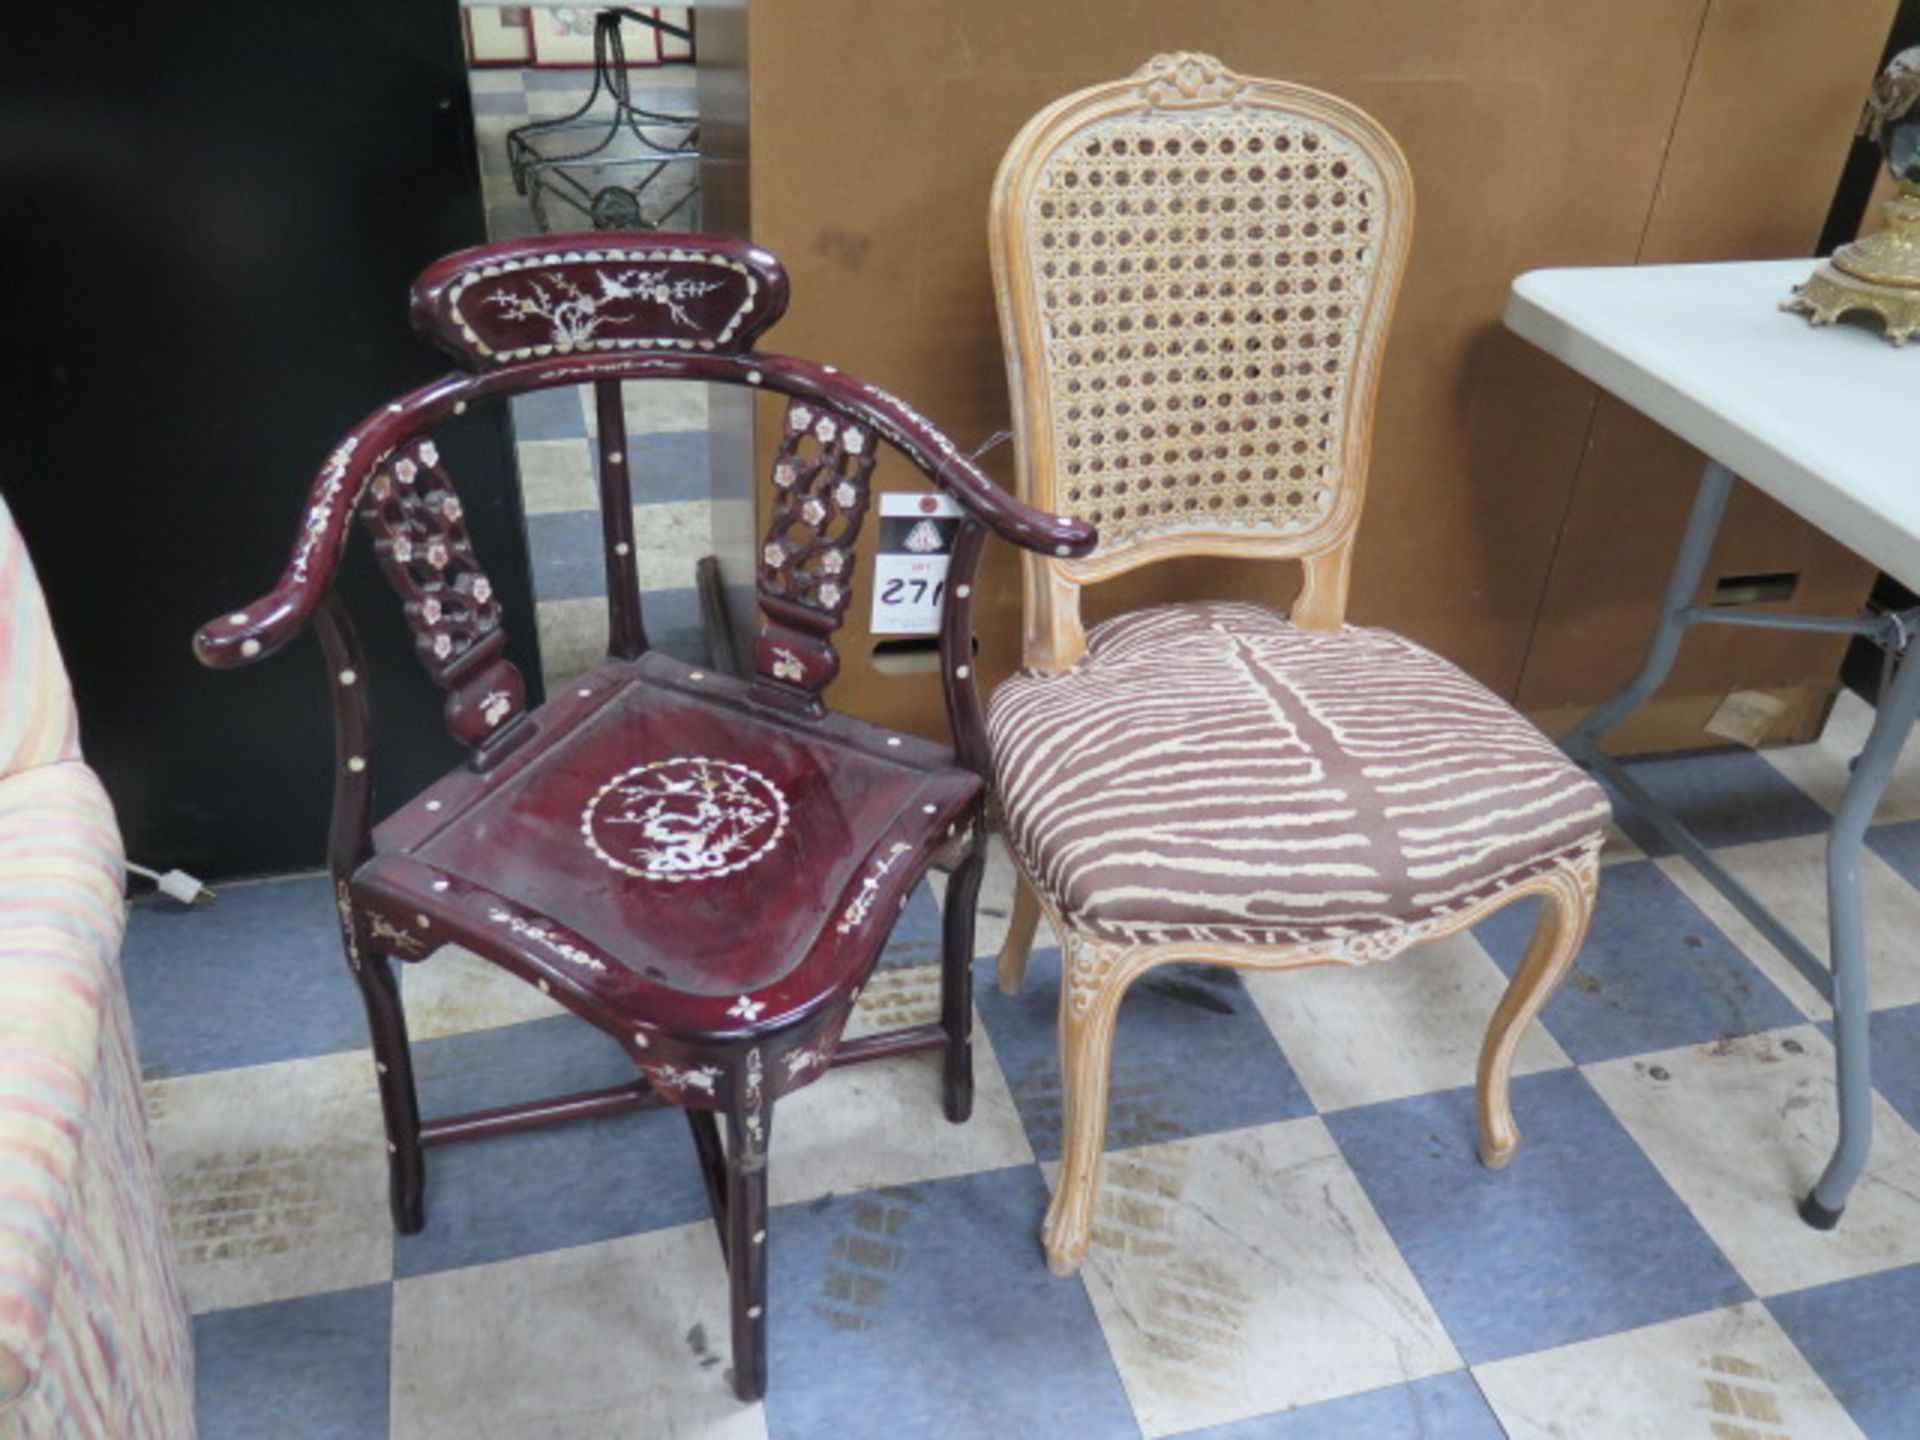 Vintage Corner Chair w/ Mother of Pearl Inlays and Vintage Style French Cane Back Chair (SOLD AS-IS